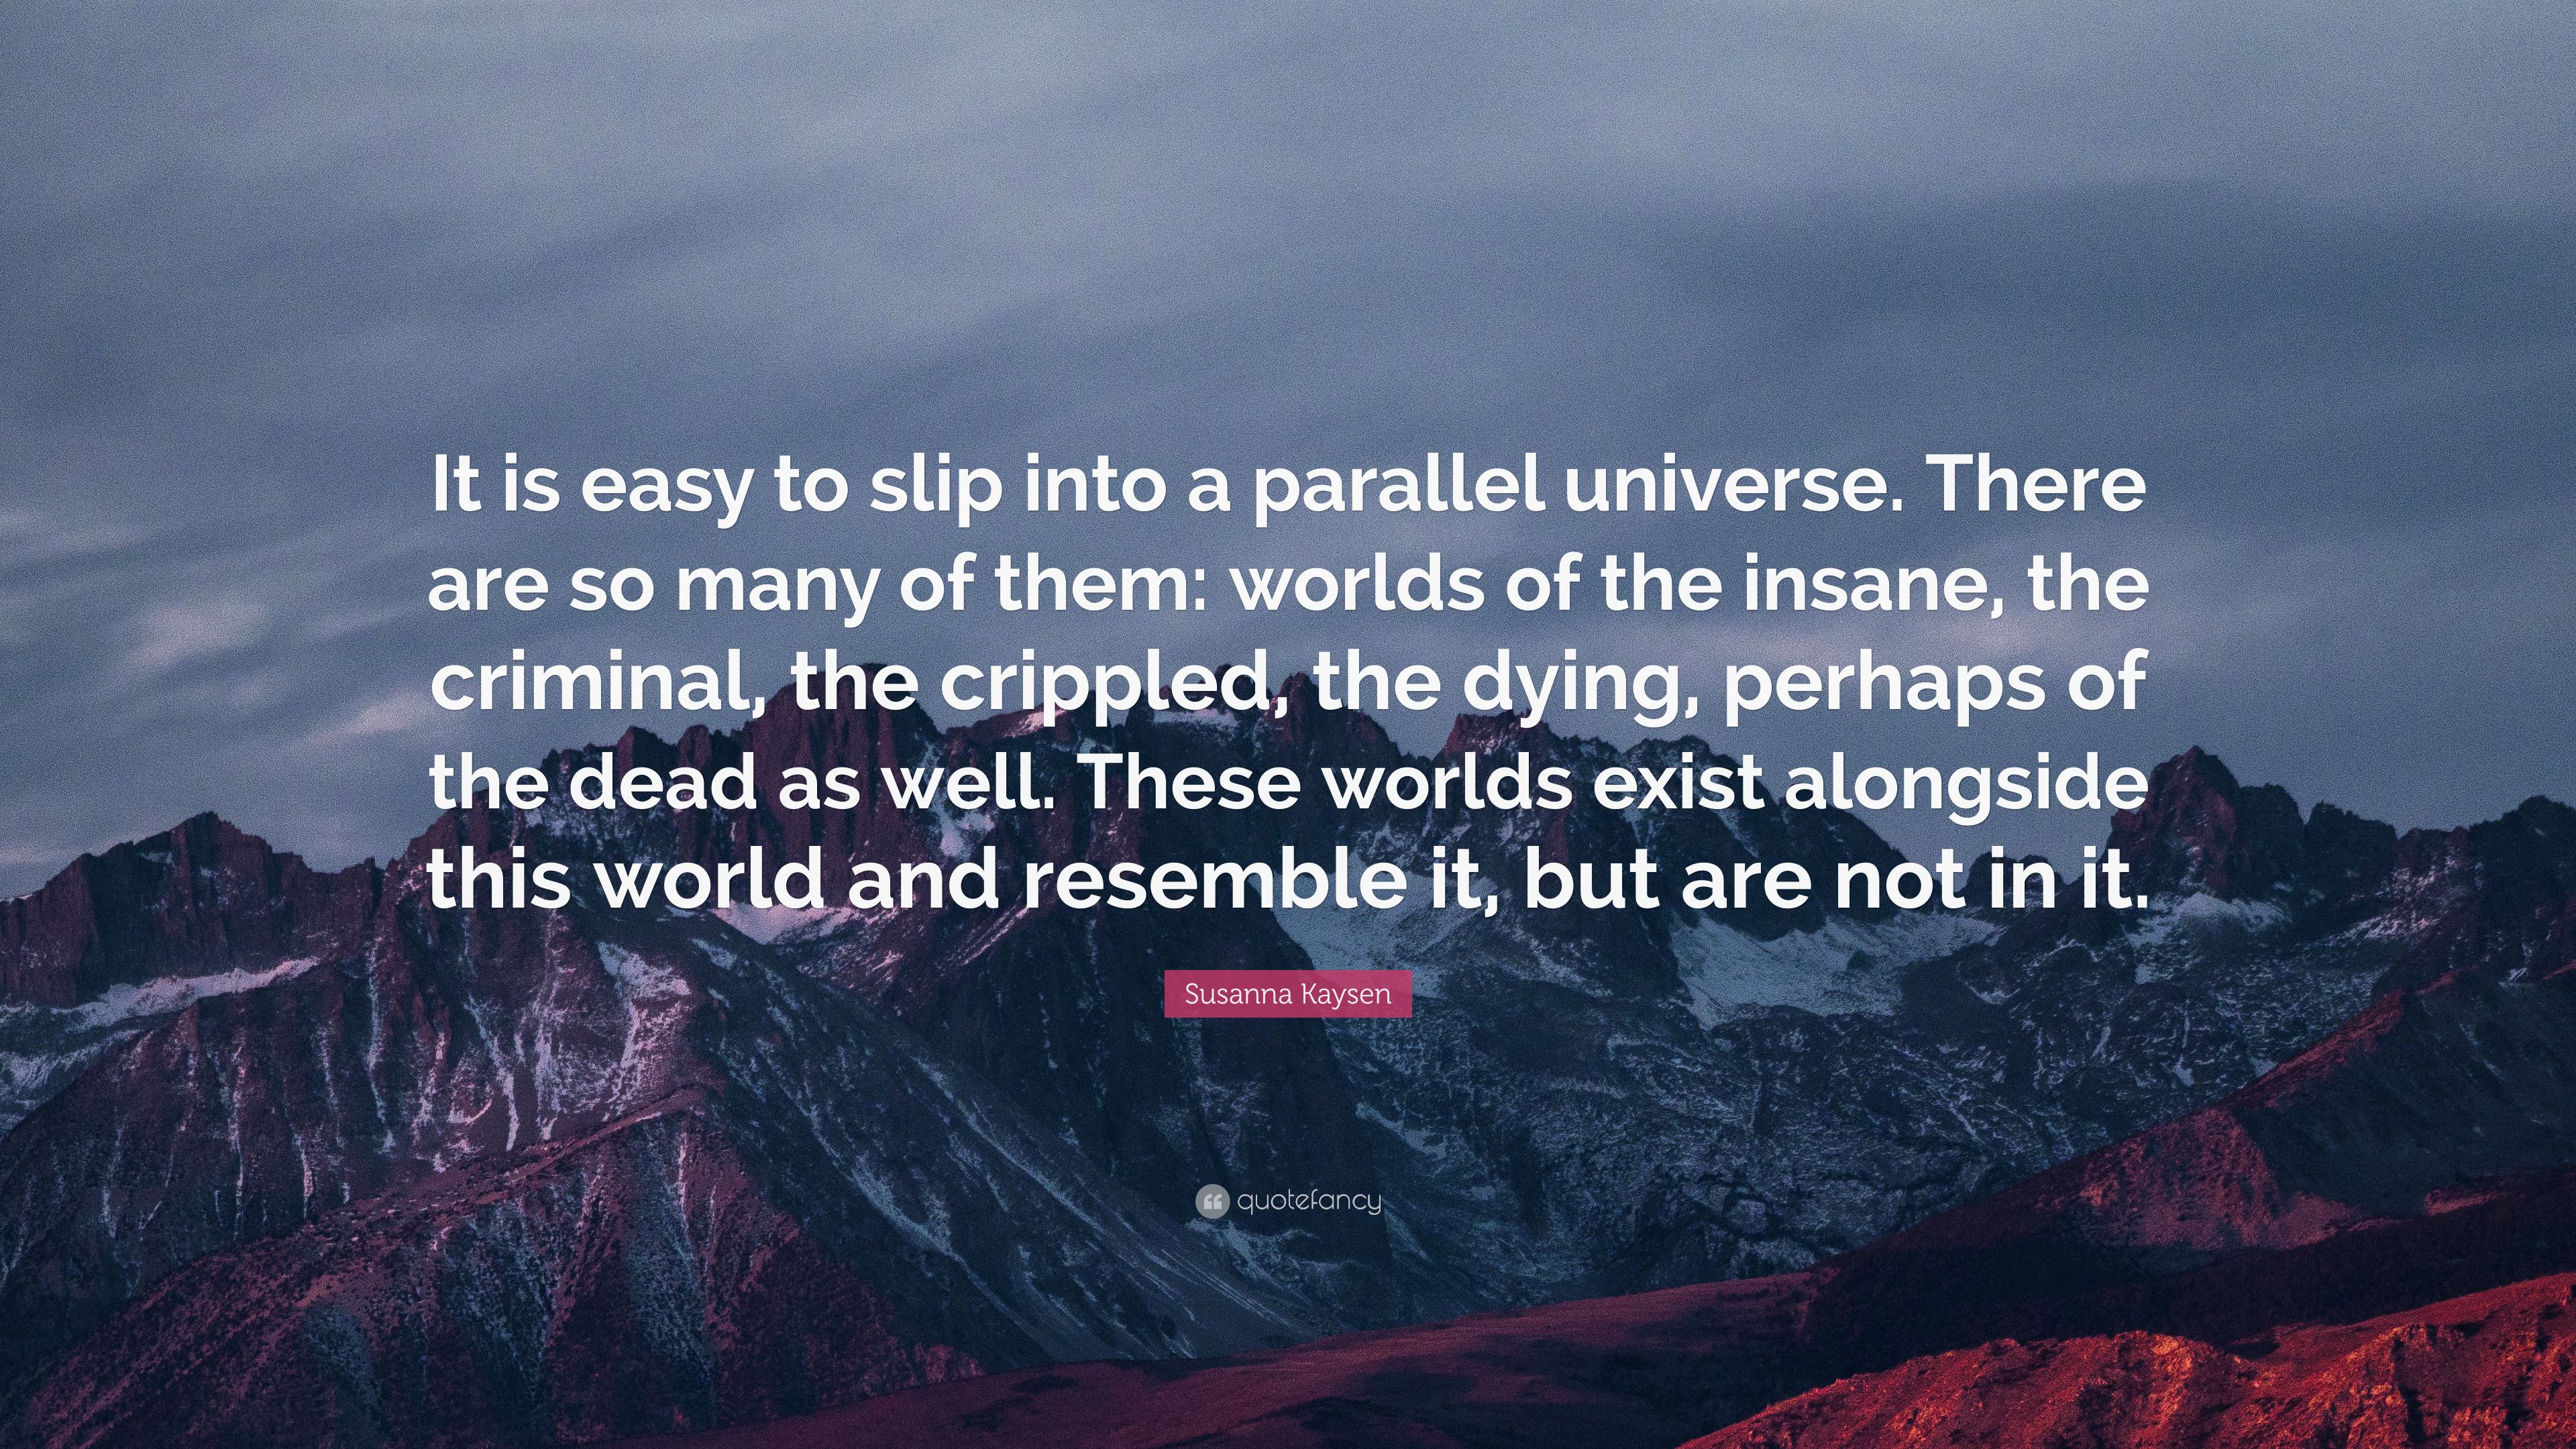 Susanna Kaysen Quote: “It is easy to slip into a parallel universe. There are so many of them: worlds of the insane, the criminal, the crippled.” (7 wallpaper)